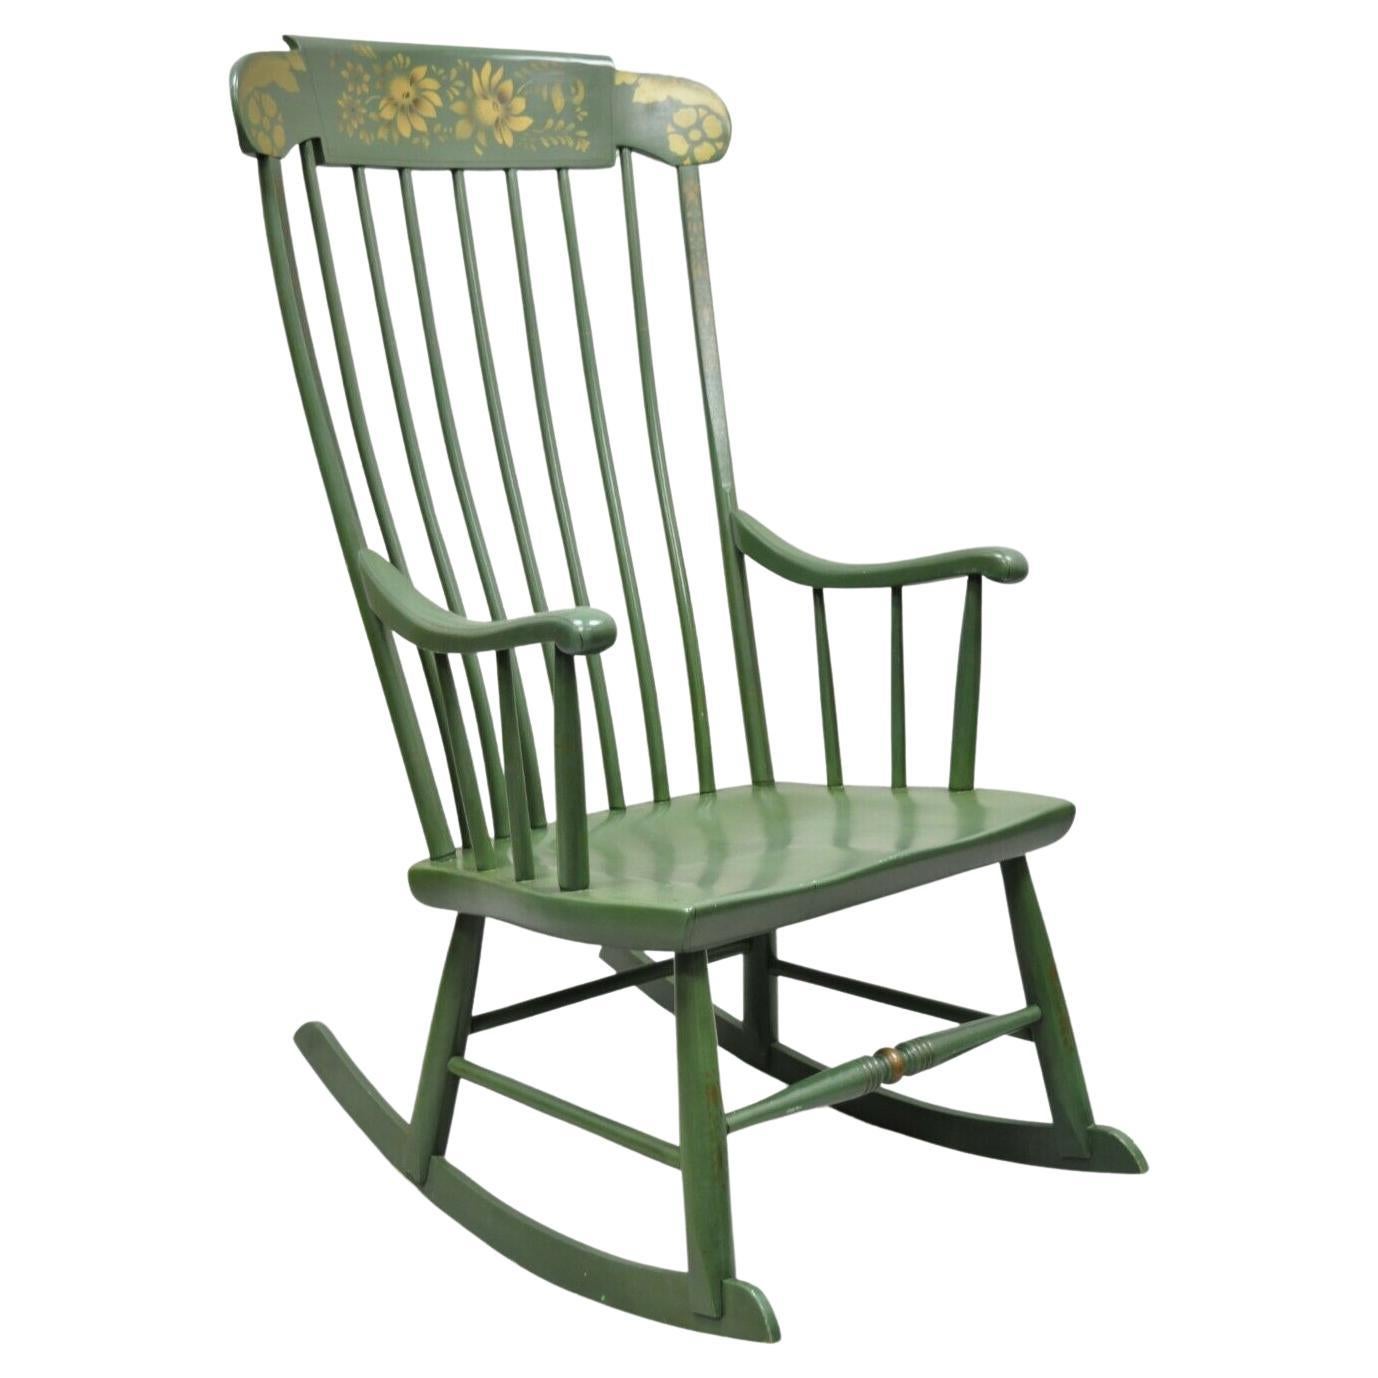 Heywood Wakefield Green Hitchcock Style Stencil Decorated Rocker Rocking Chair